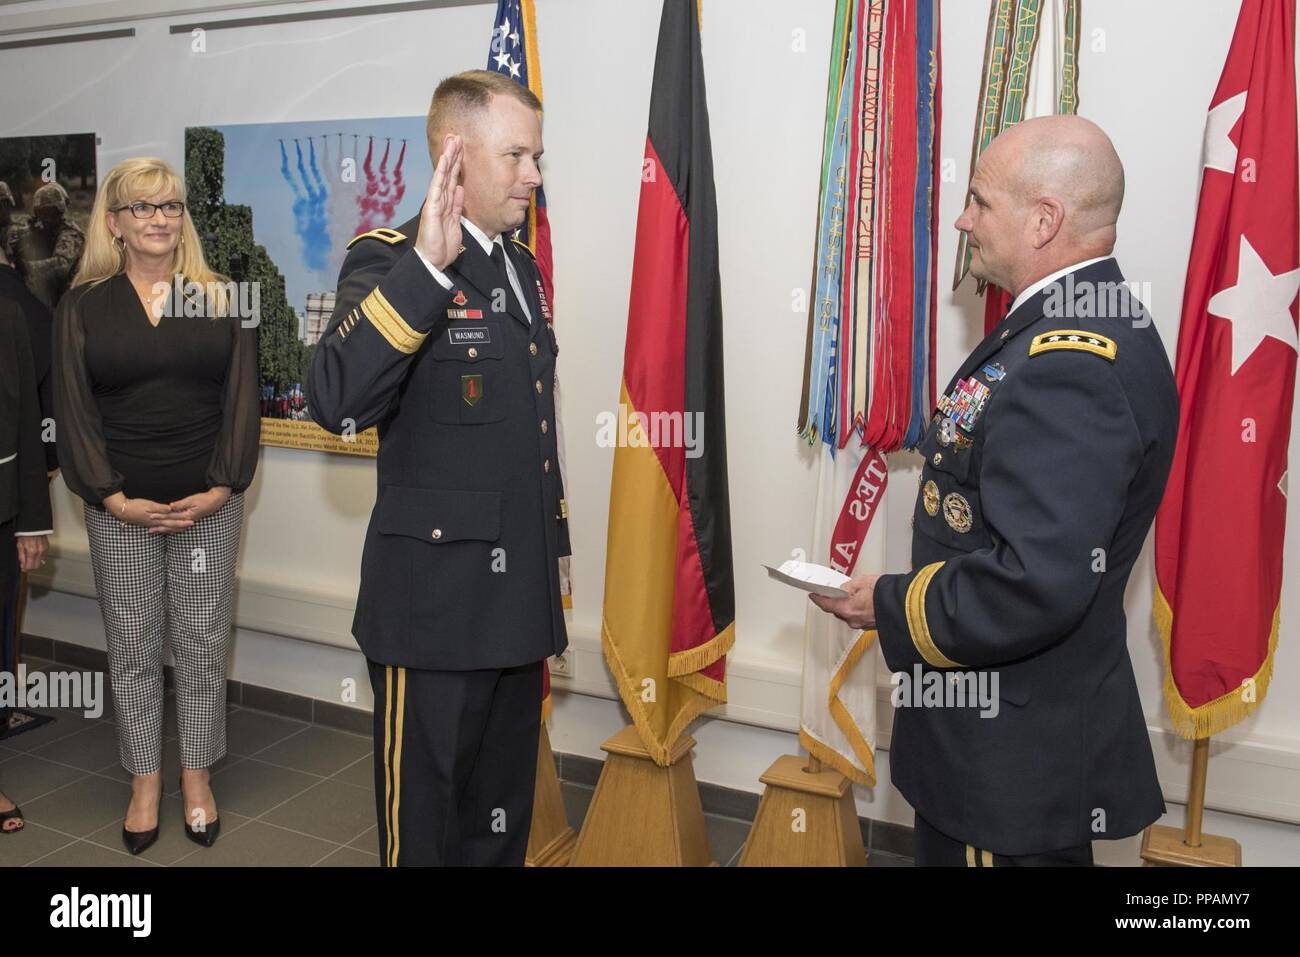 Lt. Gen. Christopher Cavoli, right, commanding general of U.S. Army Europe, administers the Oath of Office to newly promoted Brig. Gen. Todd Wasmund, left, the deputy commanding general (DCG) of the U.S. Army Europe Mission Command Element and DCG for support for the 1st Infantry Division, while his wife, Tracy Wasmund, far left, looks on during Wasmund’s promotion ceremony held at the U.S. Army Europe headquarters in Wiesbaden, Germany, Sept. 4, 2018. Stock Photo